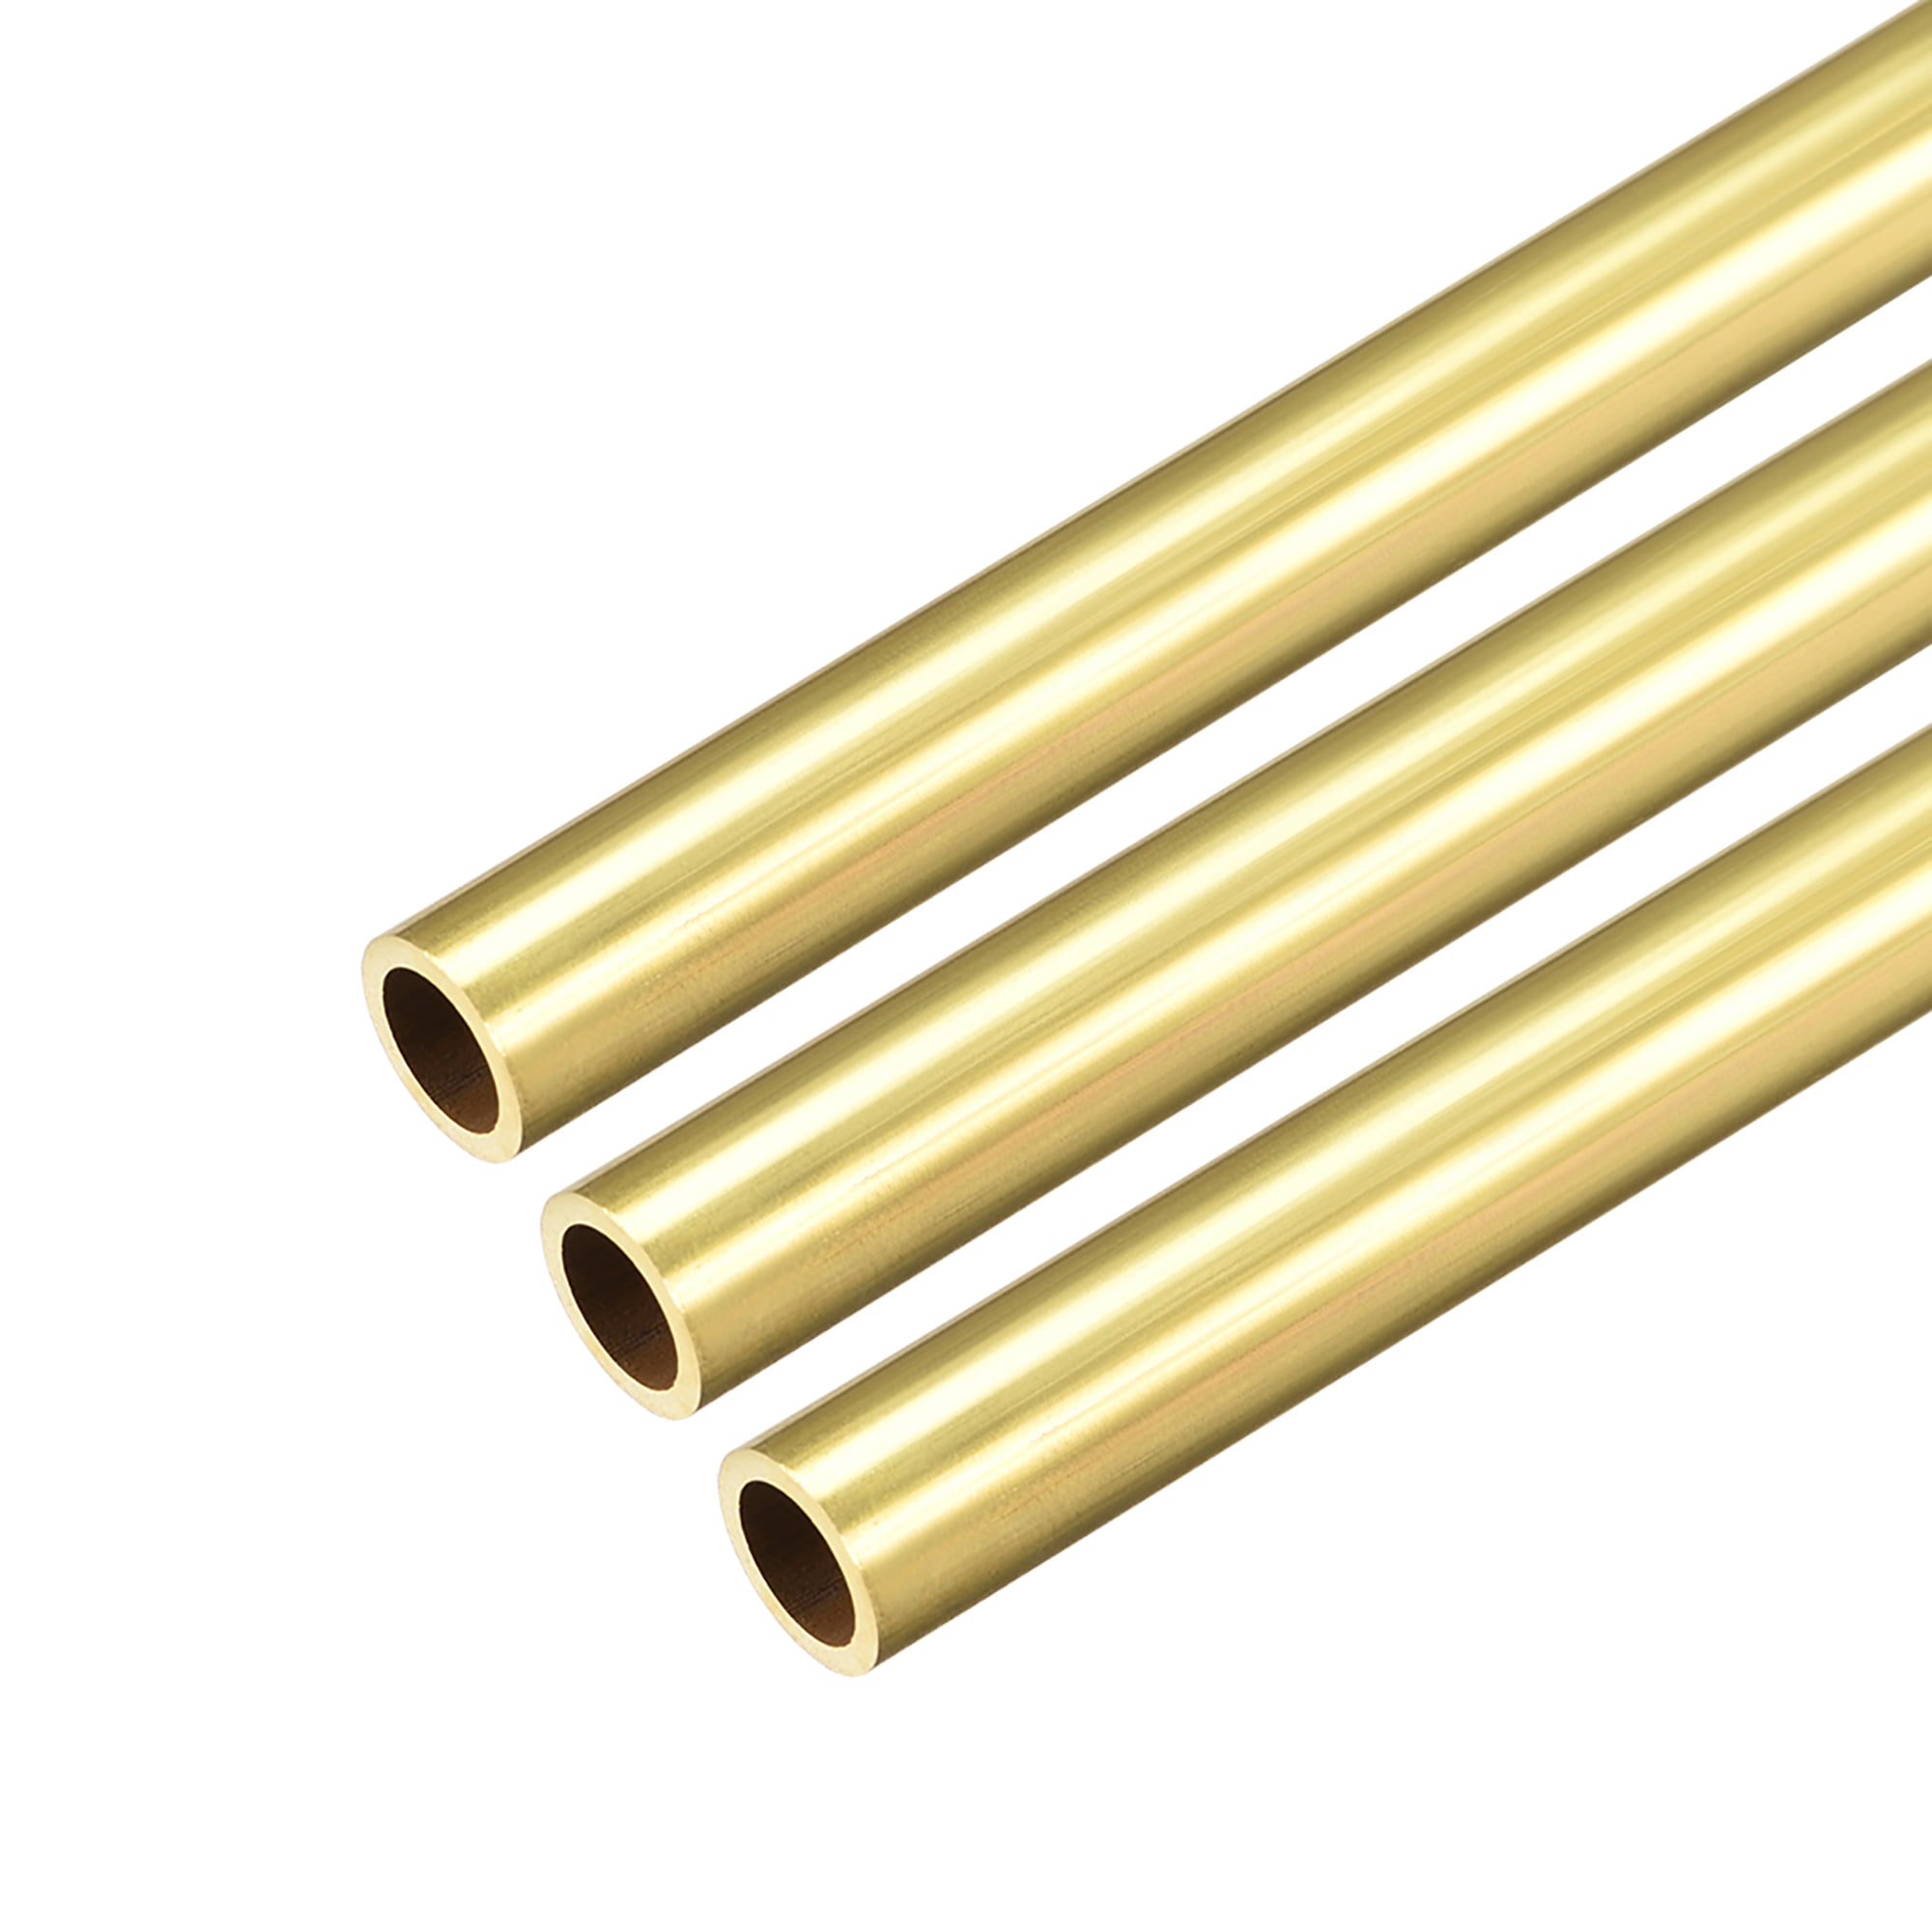 300mm Length 3mm OD 0.75mm Wall Thickness Seamless Straight Pipe Tubing 3 Pcs uxcell Brass Round Tube